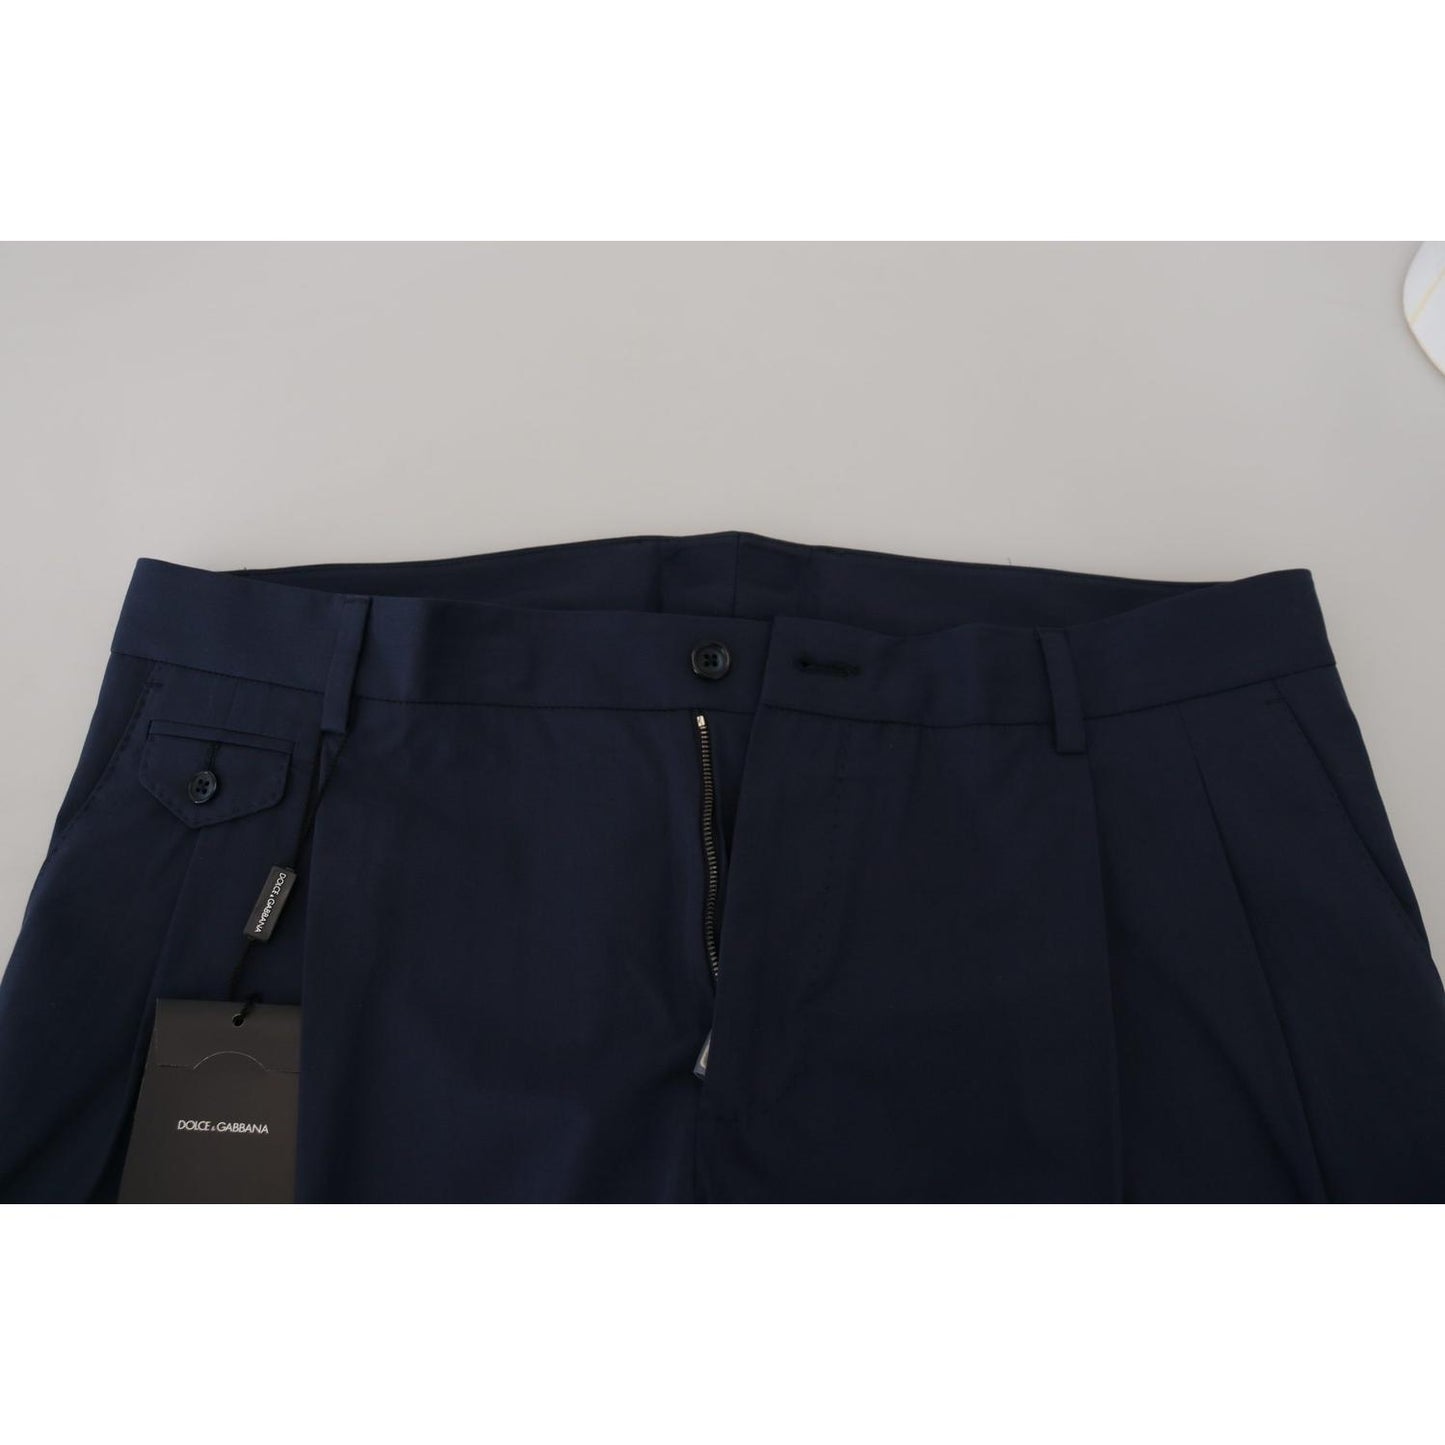 Dolce & Gabbana Chic Slim Fit Chinos in Blue blue-cotton-slim-trousers-chinos-pants